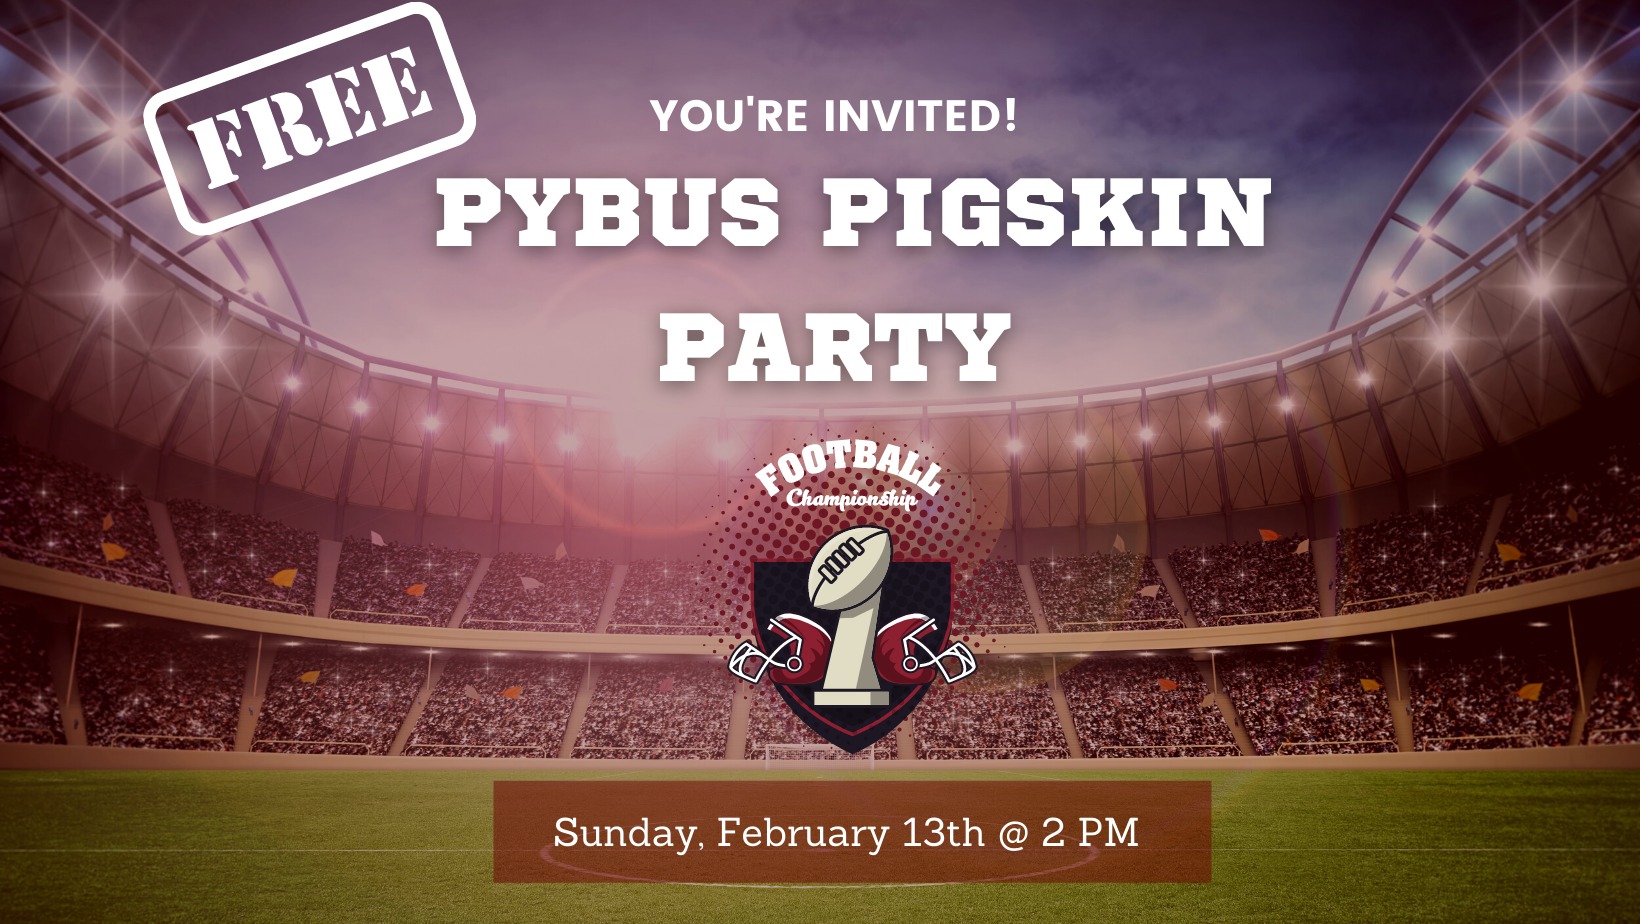 <h1 class="tribe-events-single-event-title">Pybus Pigskin Party – FREE EVENT!</h1>